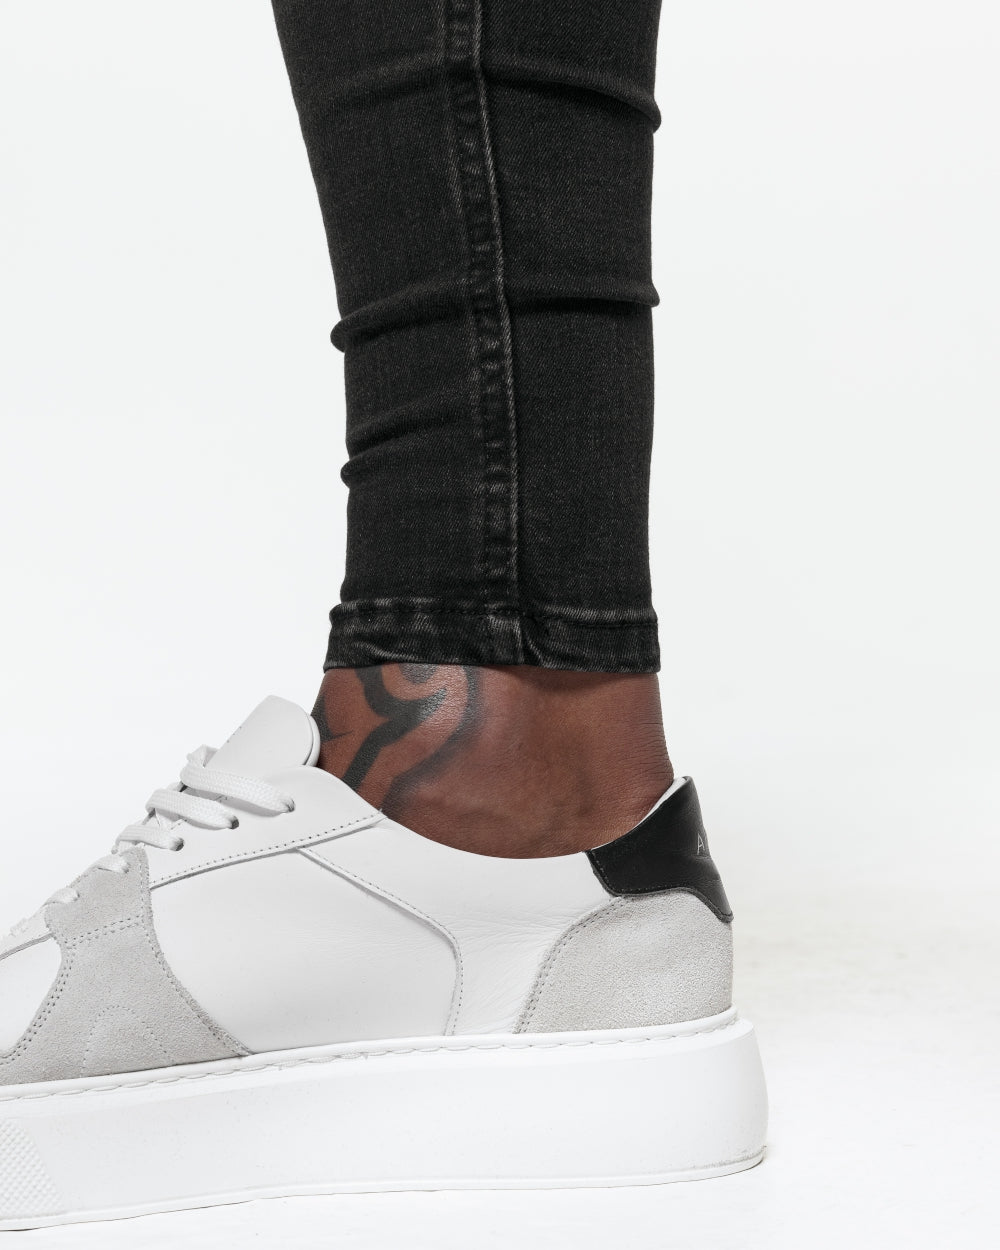 Super Skinny Spray On Jeans – Washed Black Ripped &amp; Repaired